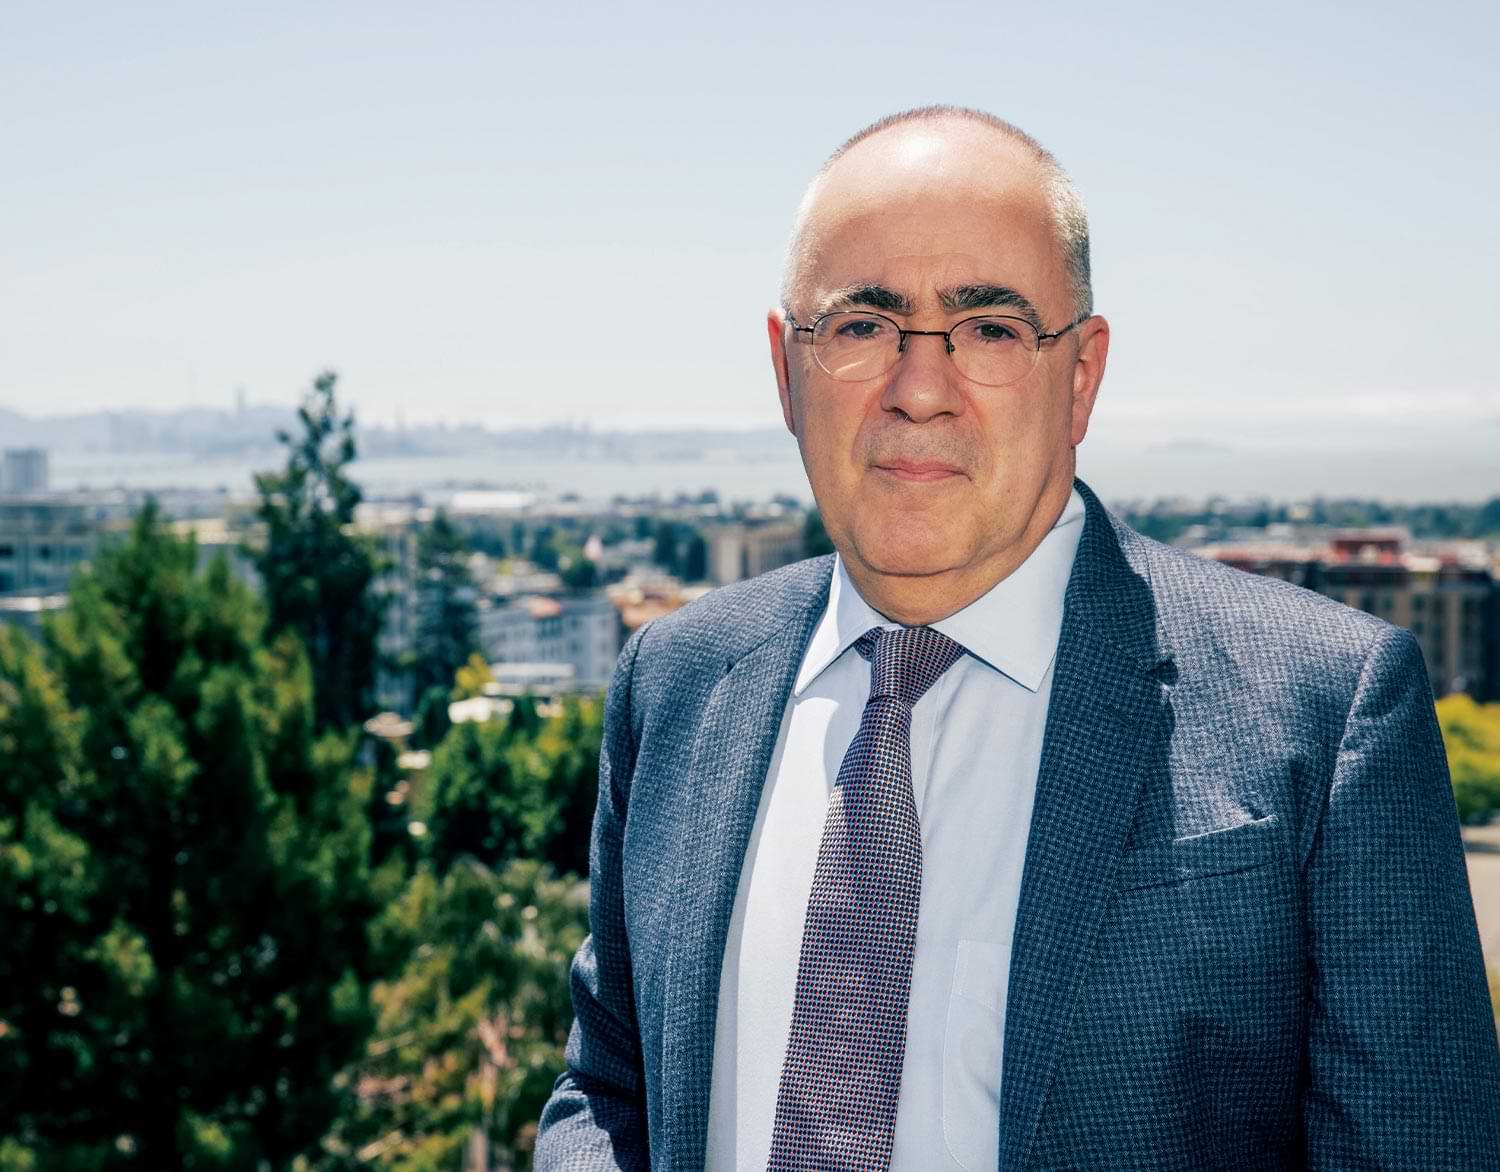 Hanoch Dagan photographed wearing a suit jacket, tie and thin rimmed glasses while standing against a city landscape on a bright day